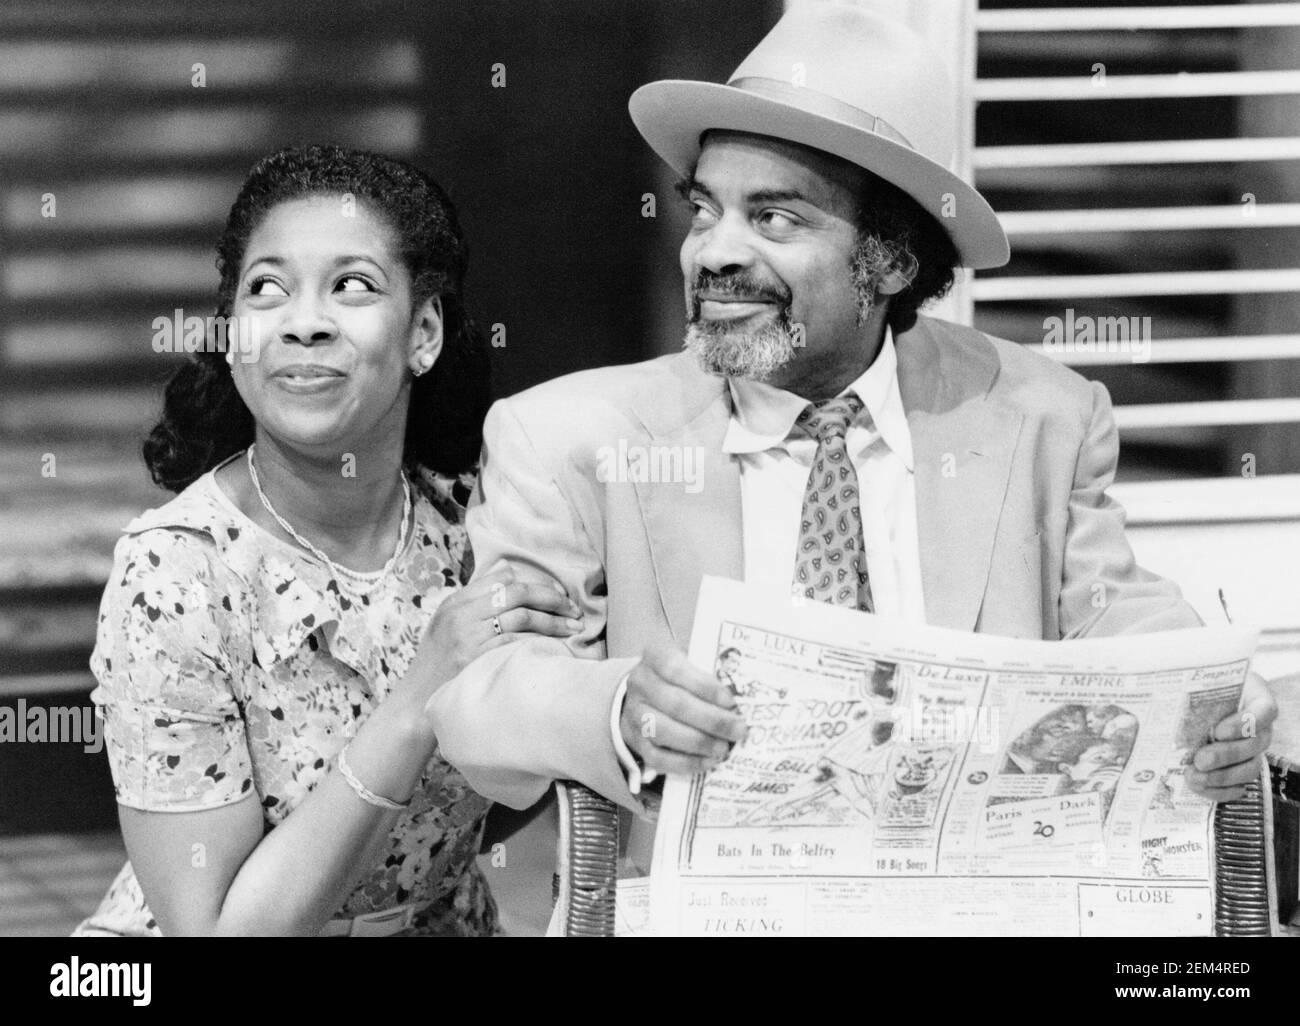 Joan-Ann Maynard (Olga), Ram John Holder (Dr Charles) in TRINIDAD SISTERS by Mustapha Matura at the Donmar Warehouse, London WC2  11/02/1988  a Tricycle Theatre production  design: Poppy Mitchell  lighting: David Colmer  director: Nicolas Kent Stock Photo